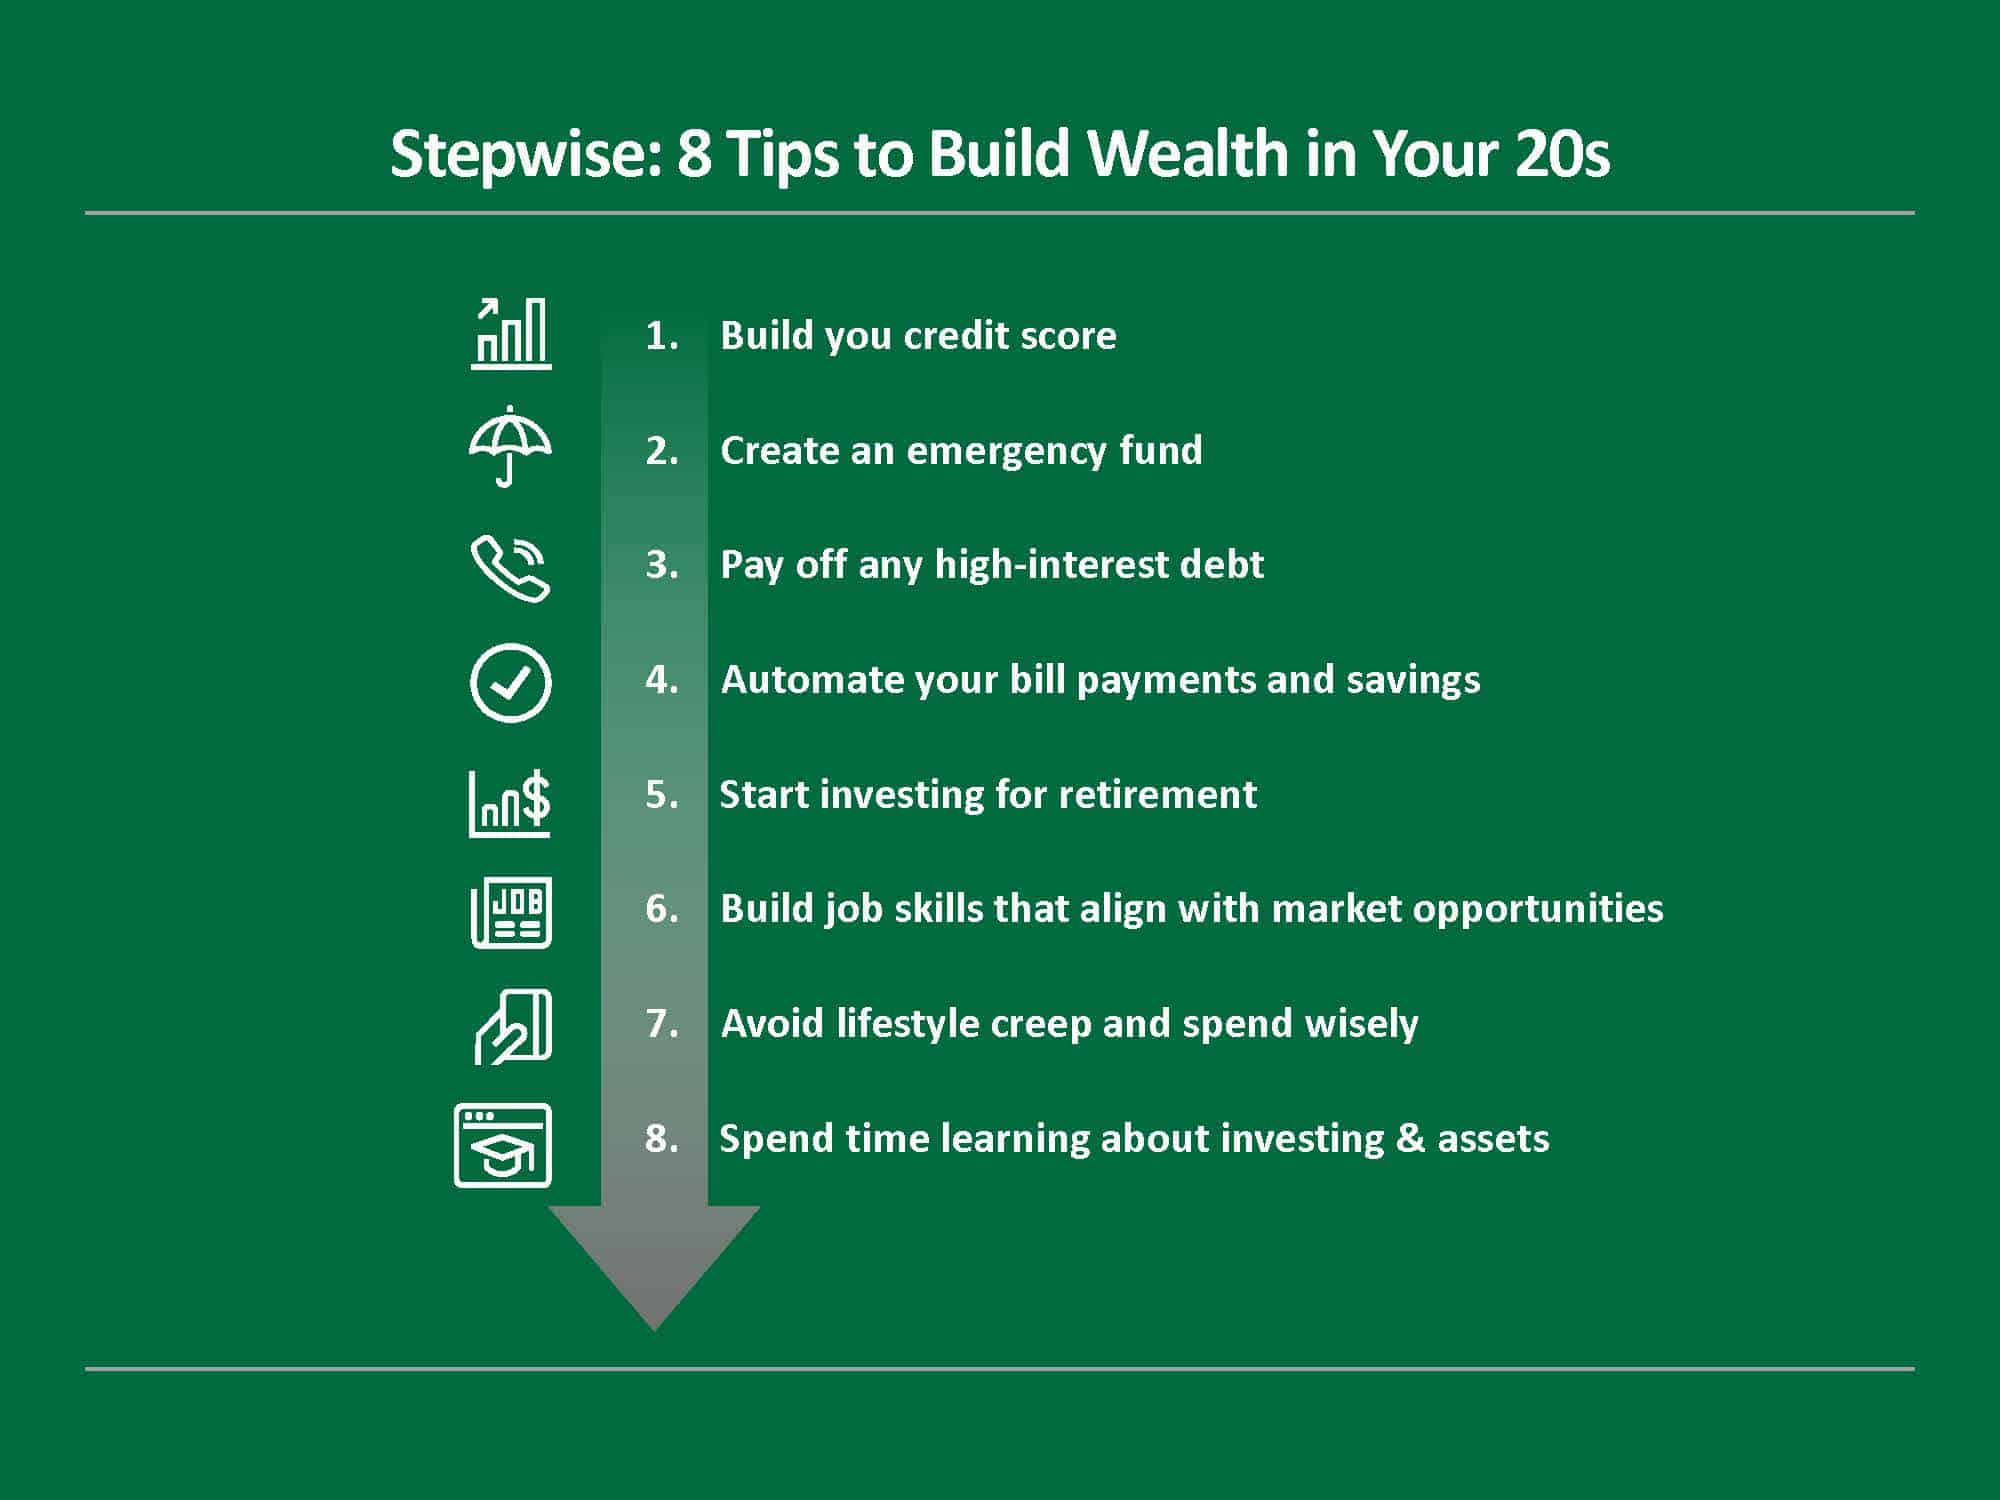 How to Build Wealth in Your 20s Stepwise